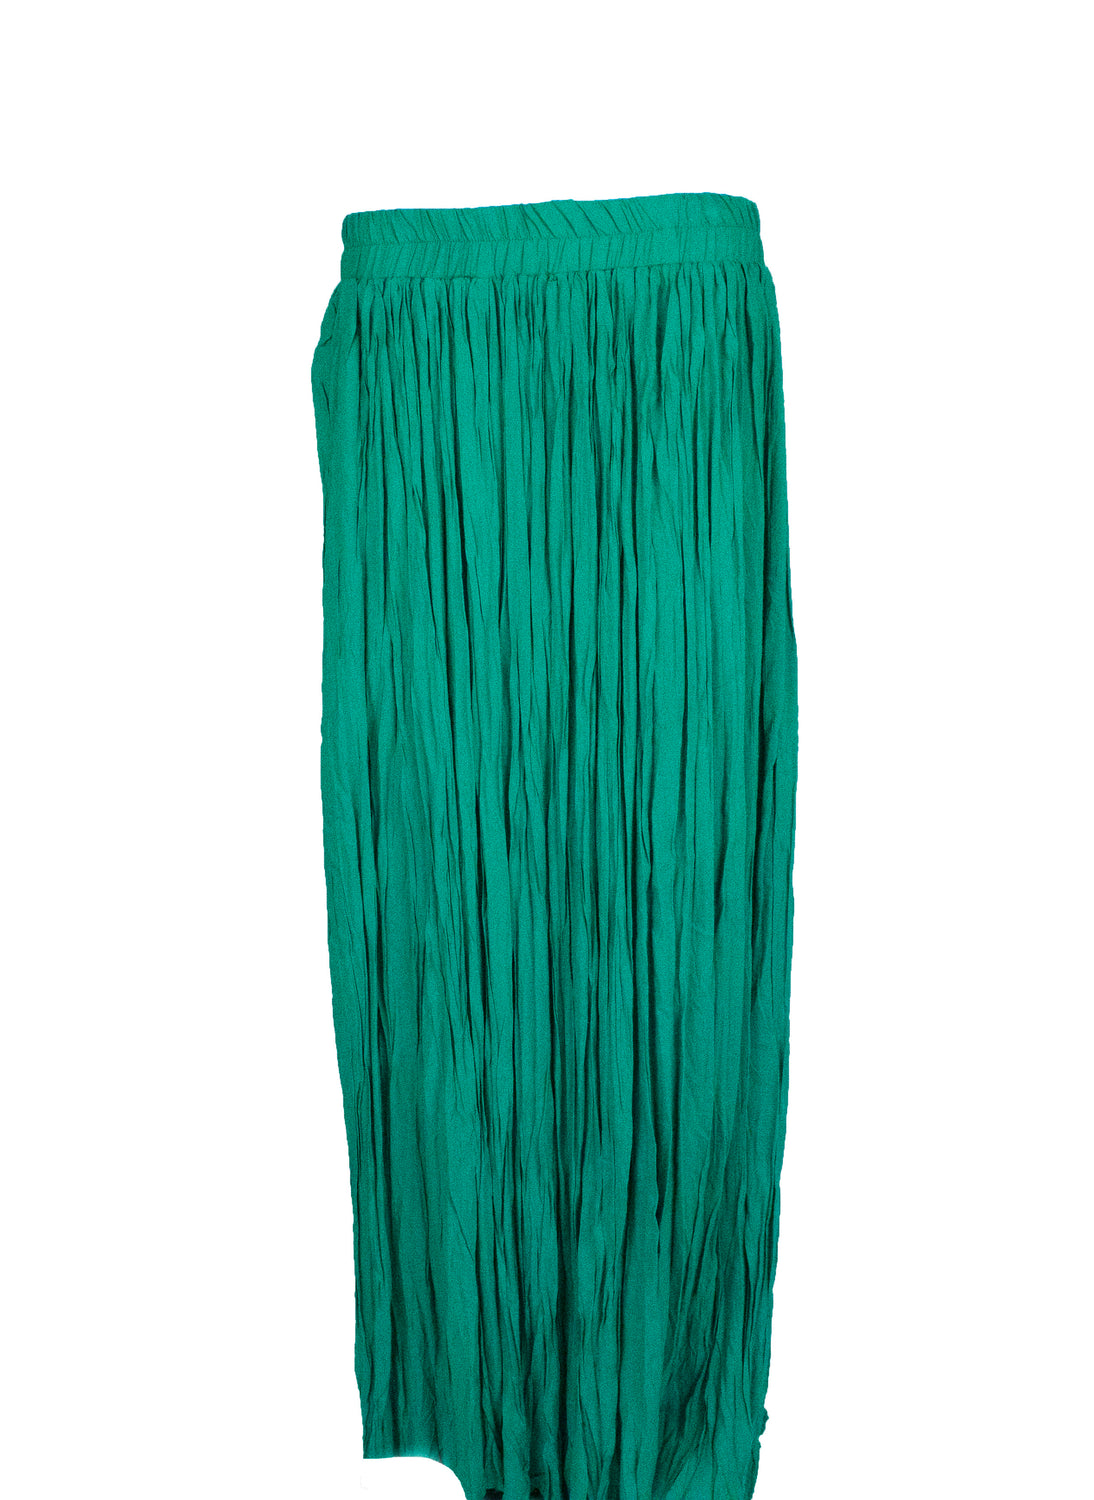 green pleated maxi skirt fully lined